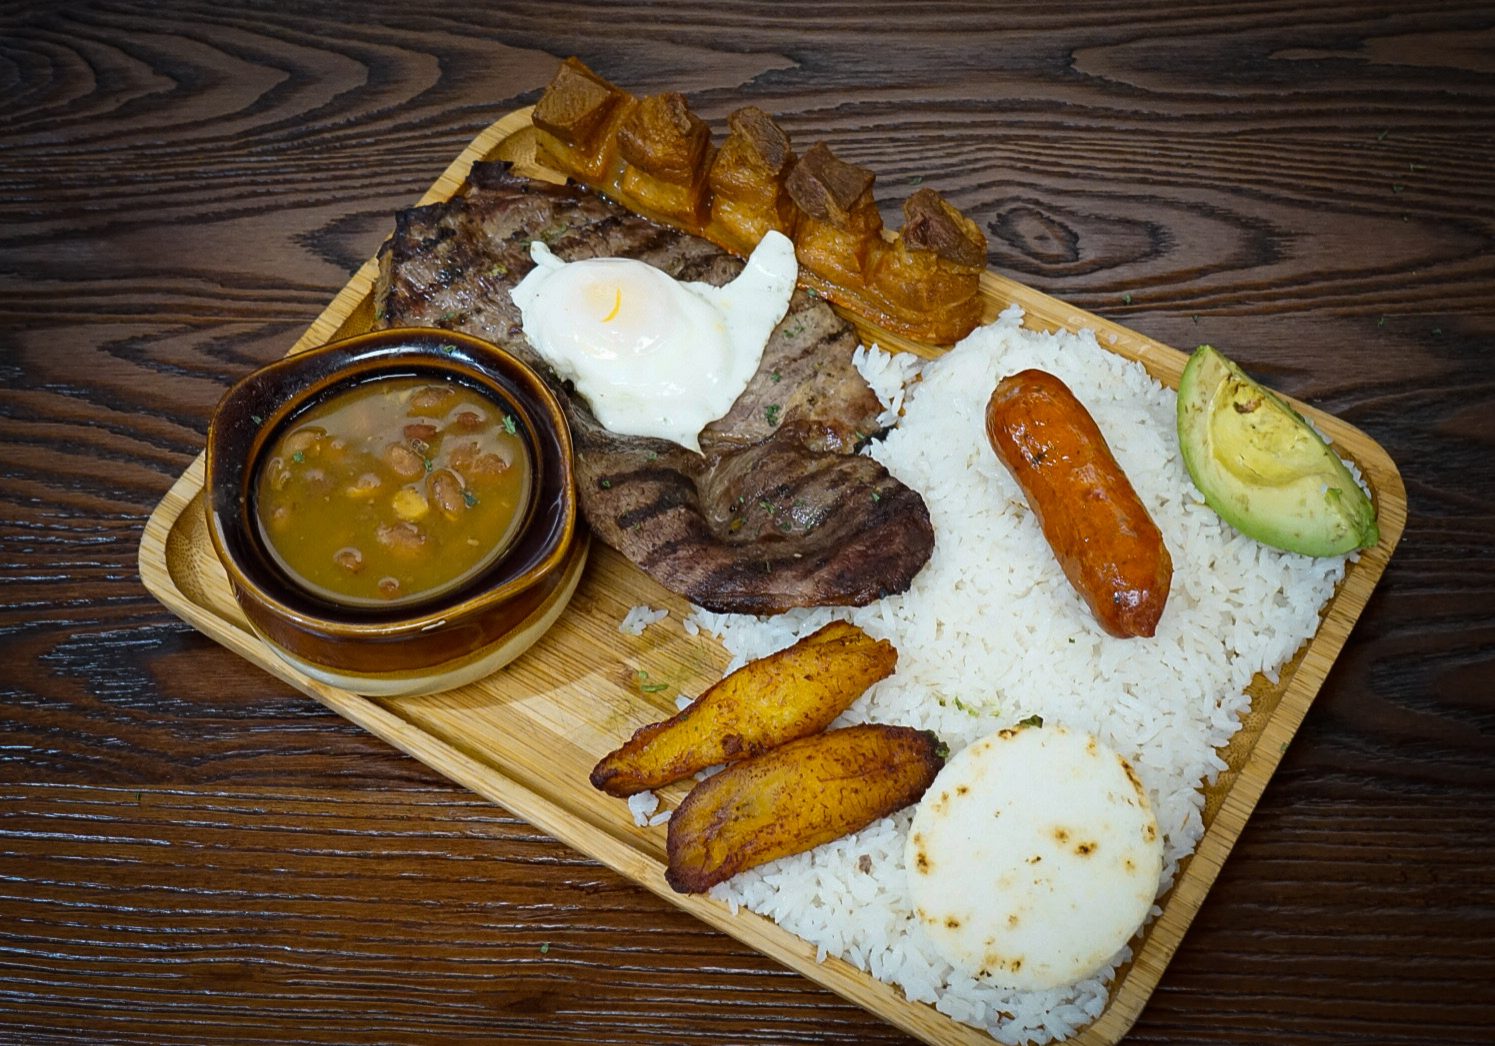 Bandeja Paisa on top of a wooden tablet.